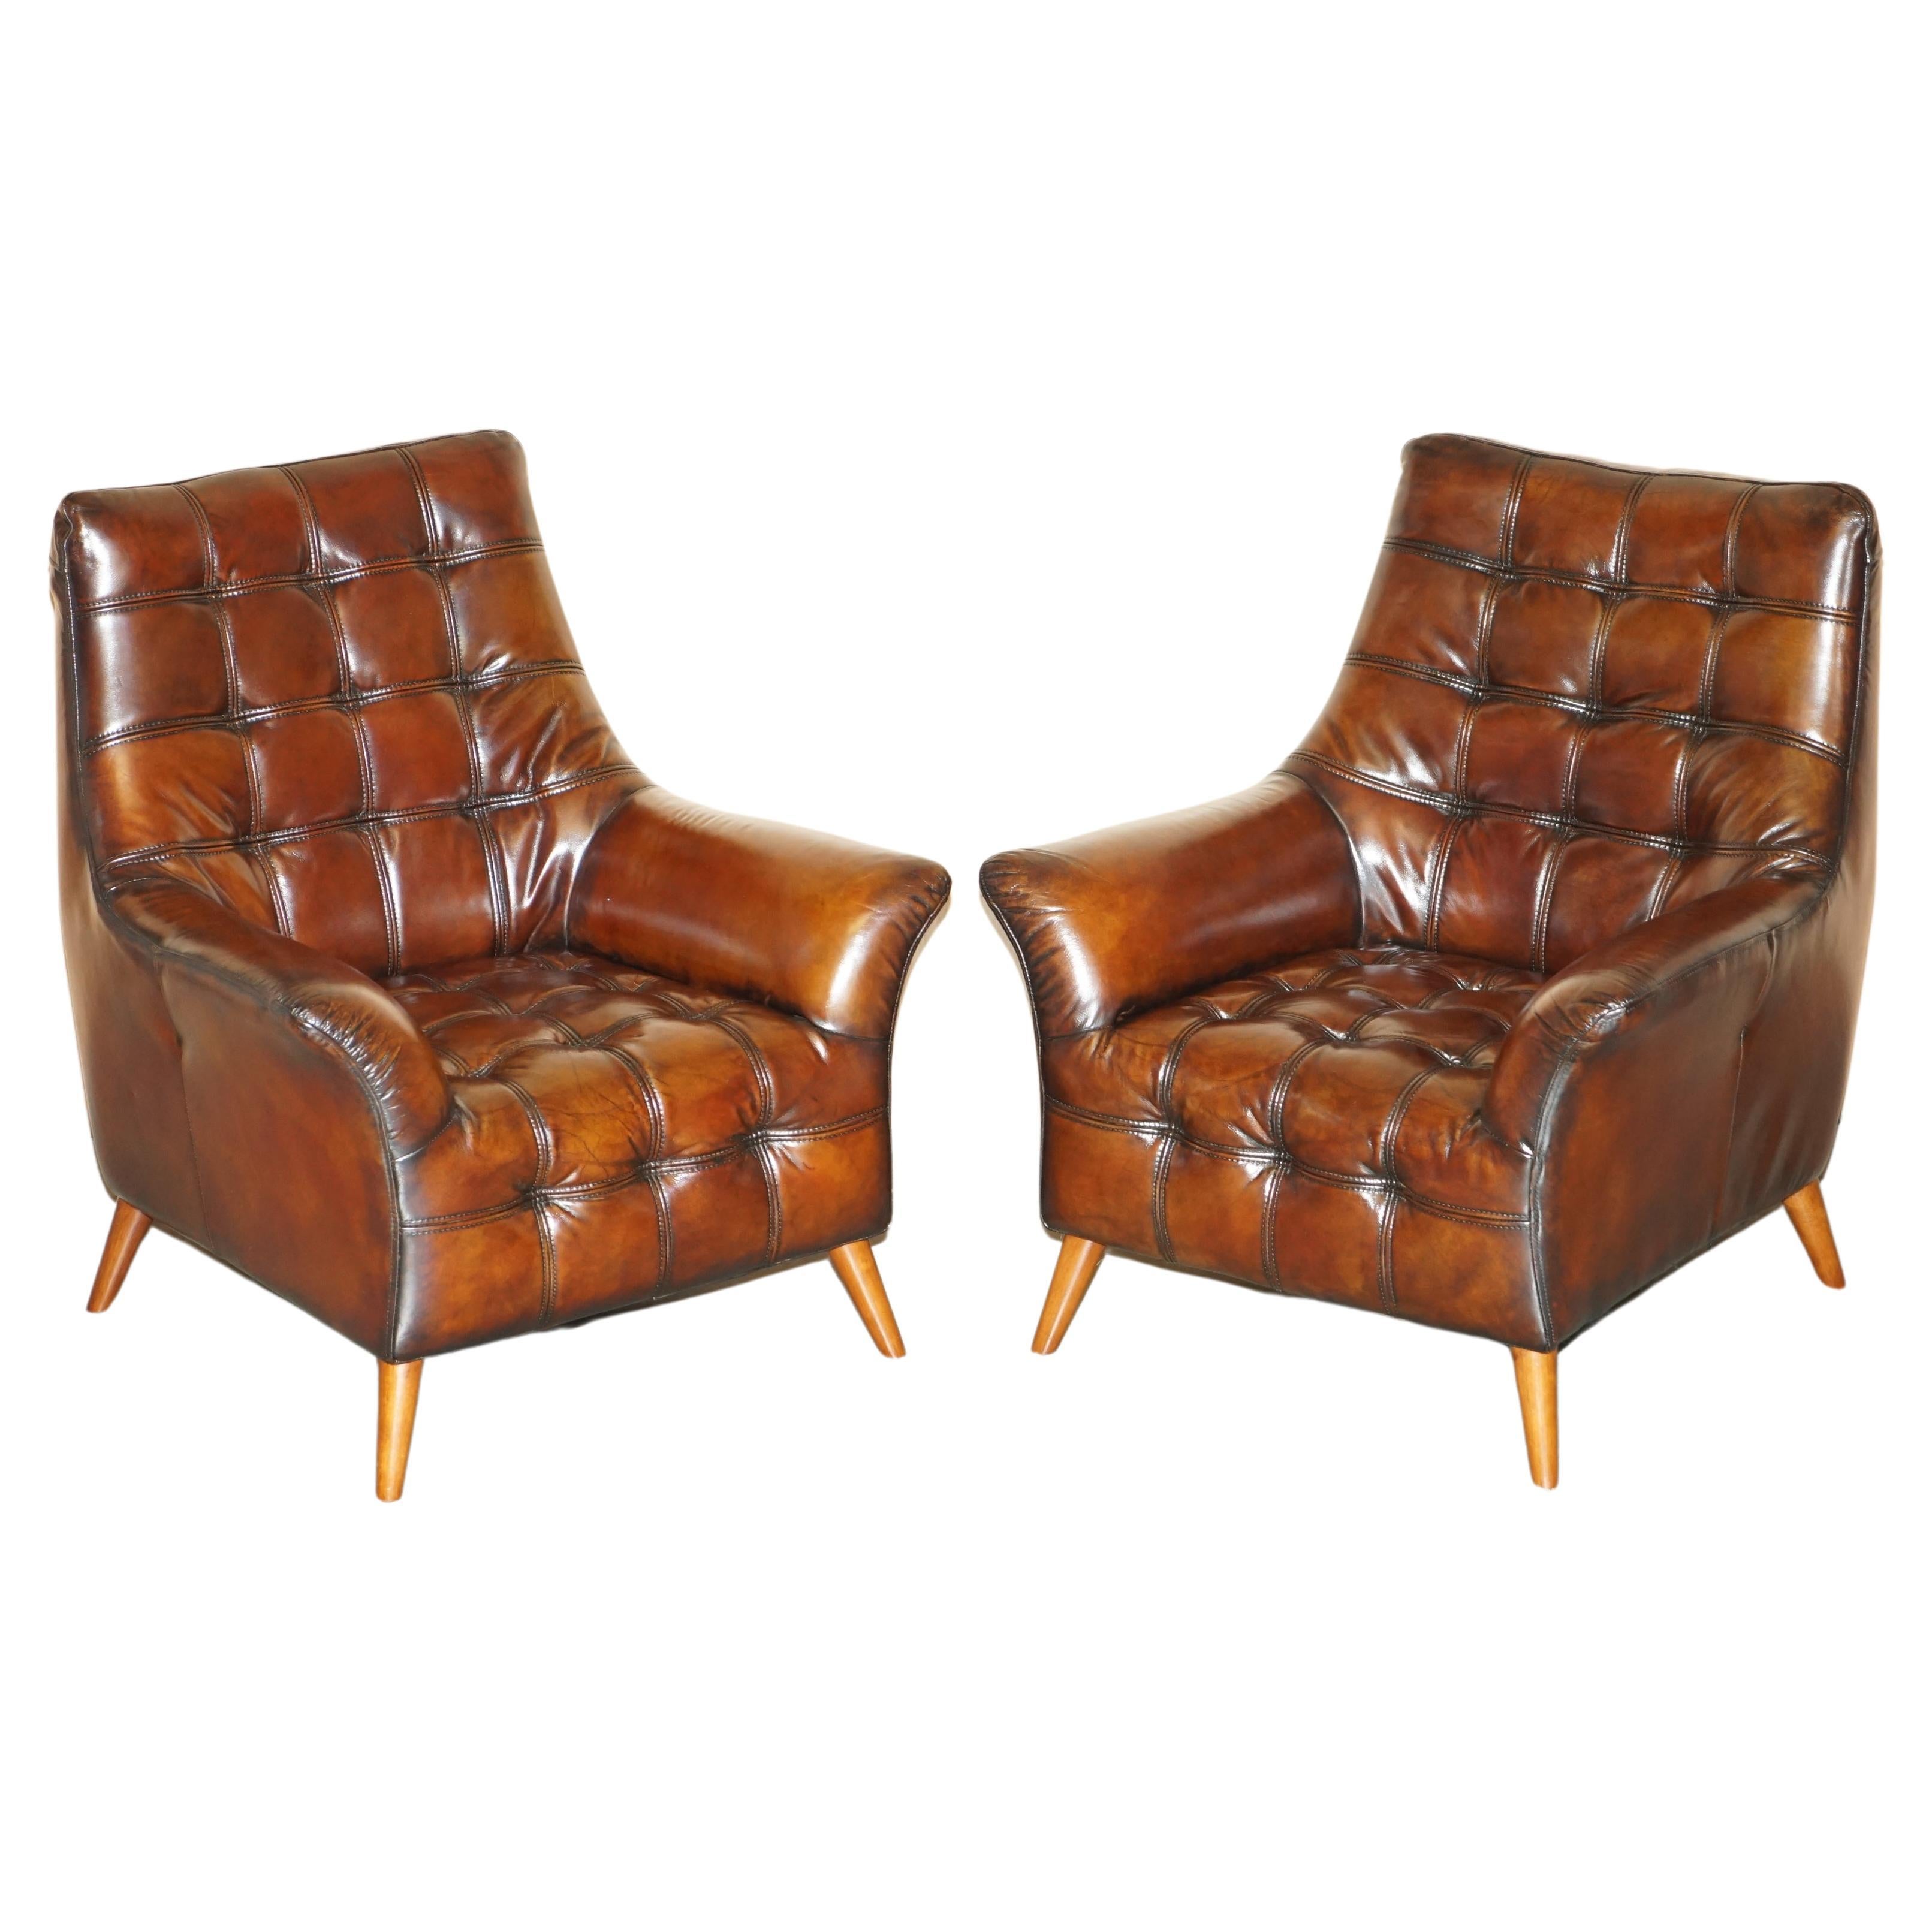 AIR OF FULLY RESTORED HAND DYED CHESTERFiELD WHISKY BROWN LEATHER ARMCHAIRS